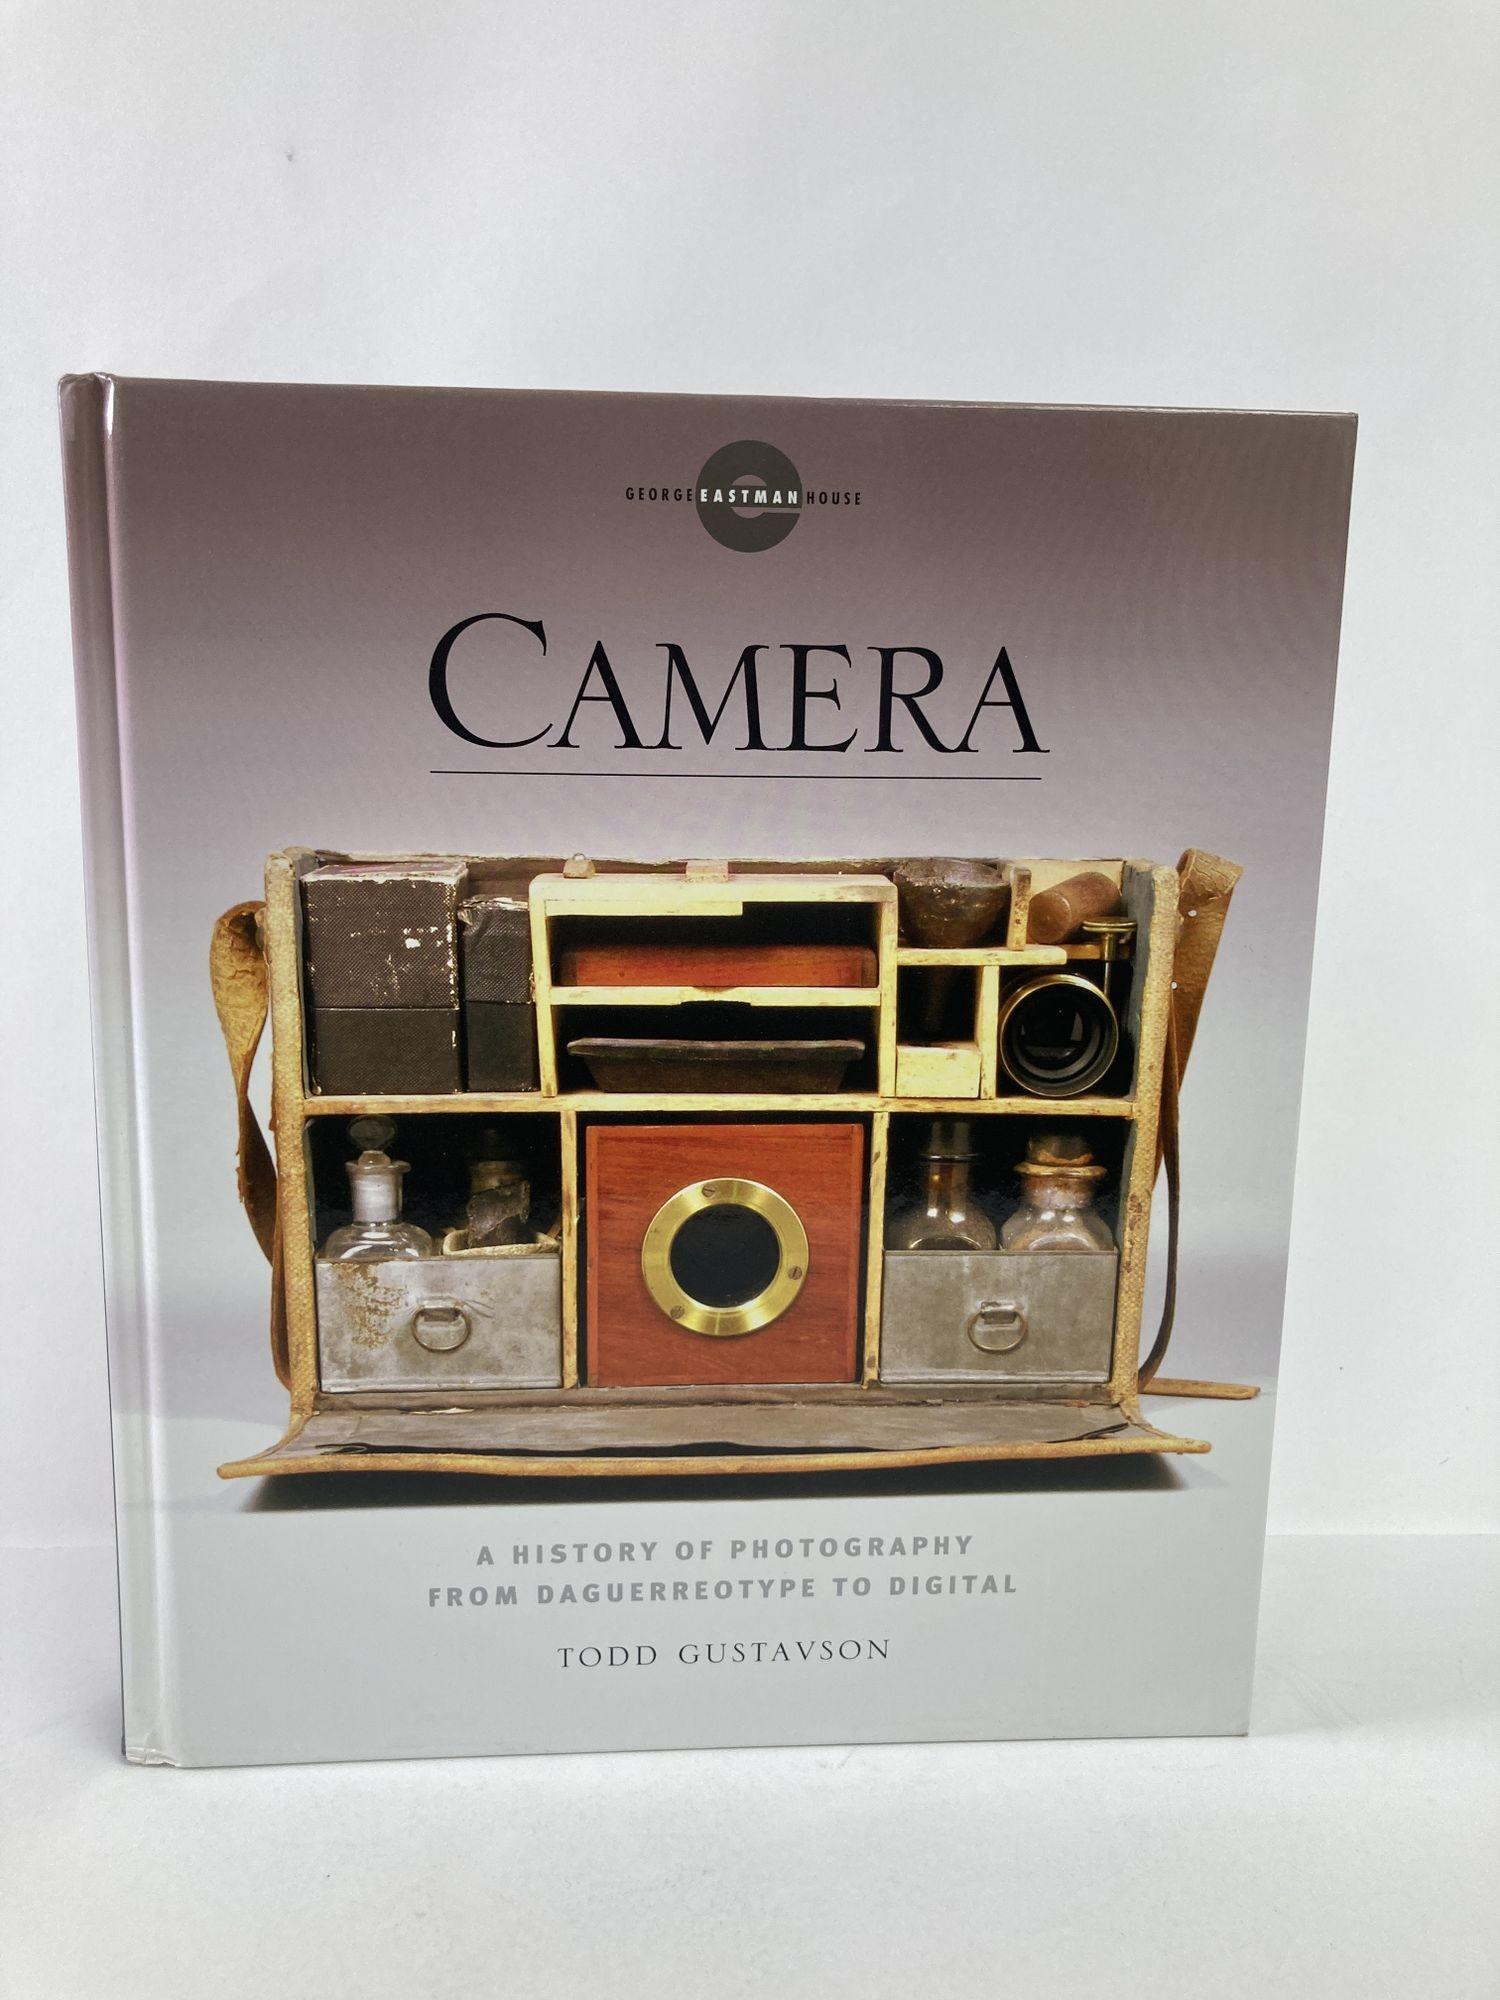 Camera: A History of Photography from Daguerreotype to Digital by Todd Gustavson Hardcover Book.
New York: Sterling Innovation, 2006. 
First Edition. Large Hardcover.
First edition. 2006 Large Hardcover.
360 pages. no dust cover
Cameras, and